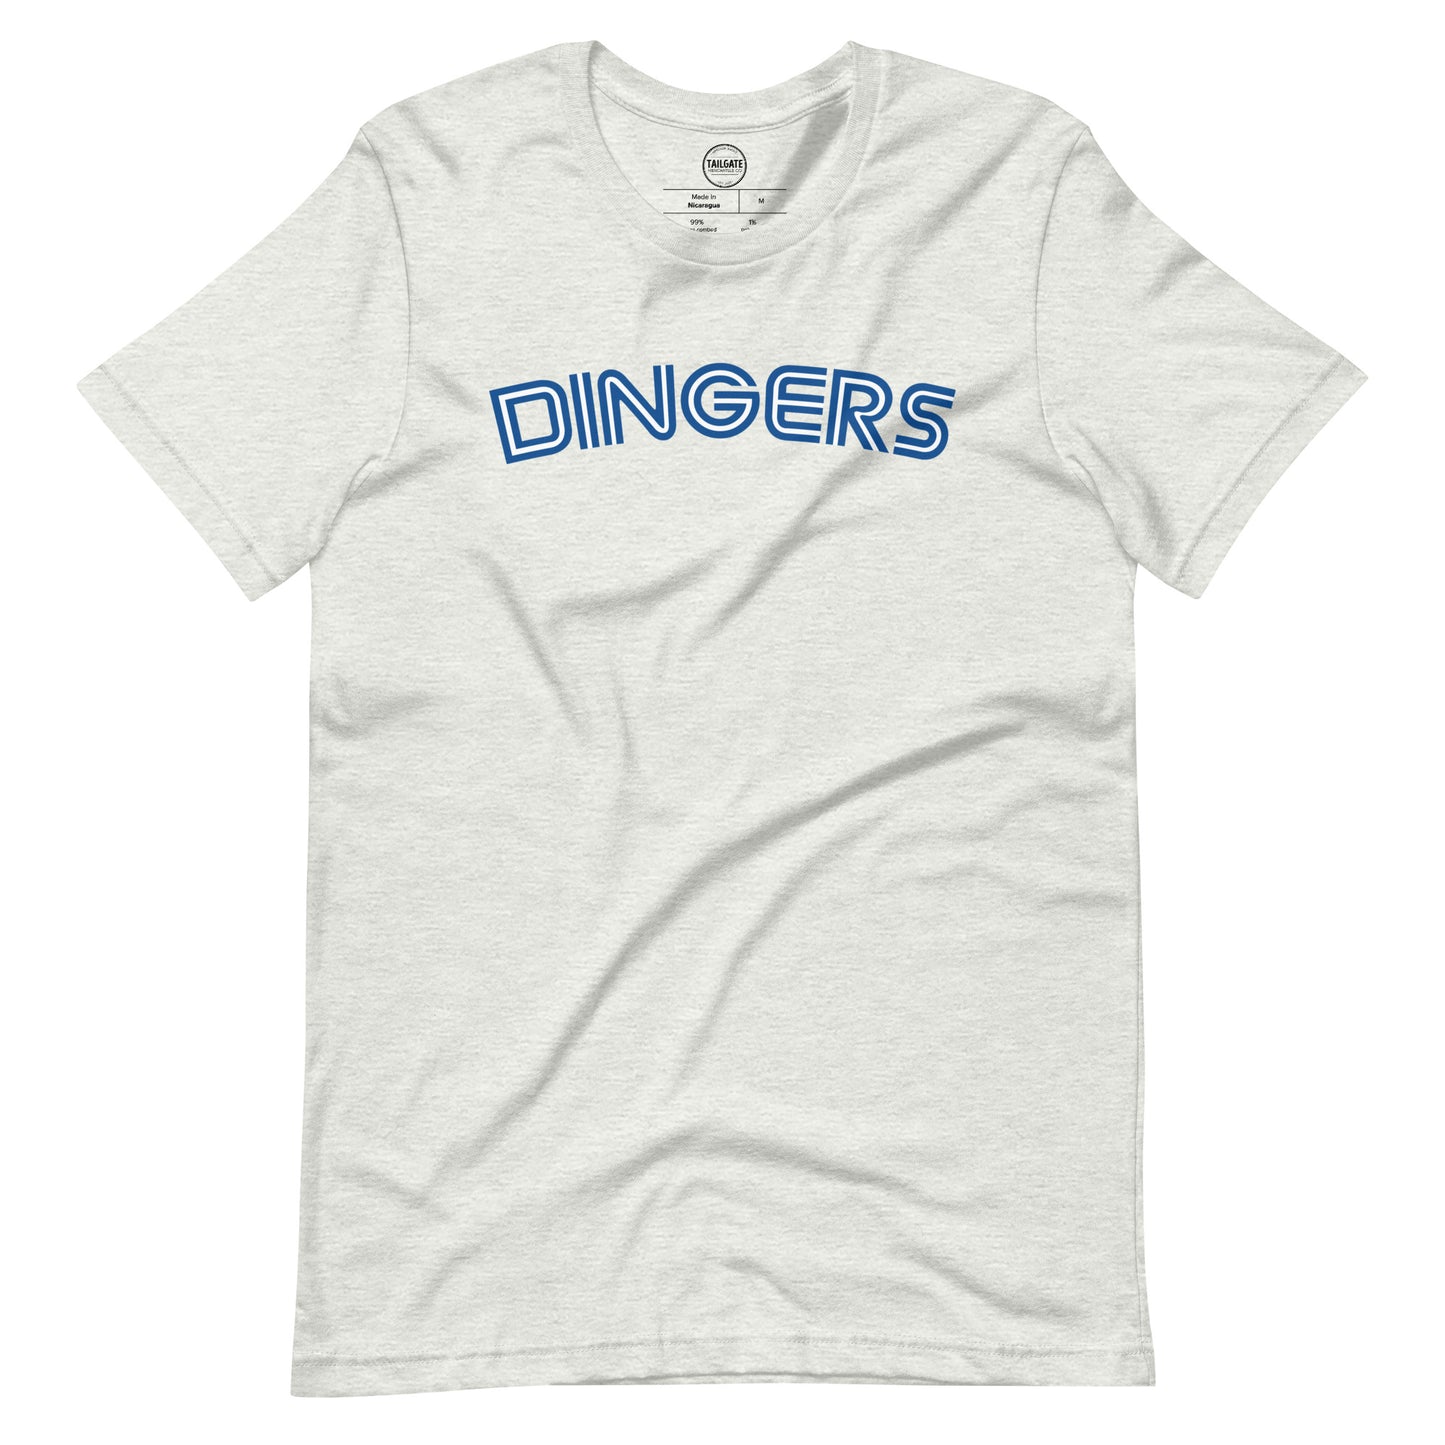 Image of heather ash t-shirt with design of "DINGERS" in Toronto Blue Jays retro blue style font located on centre chest. This design is exclusive to Tailgate Mercantile and available only online.